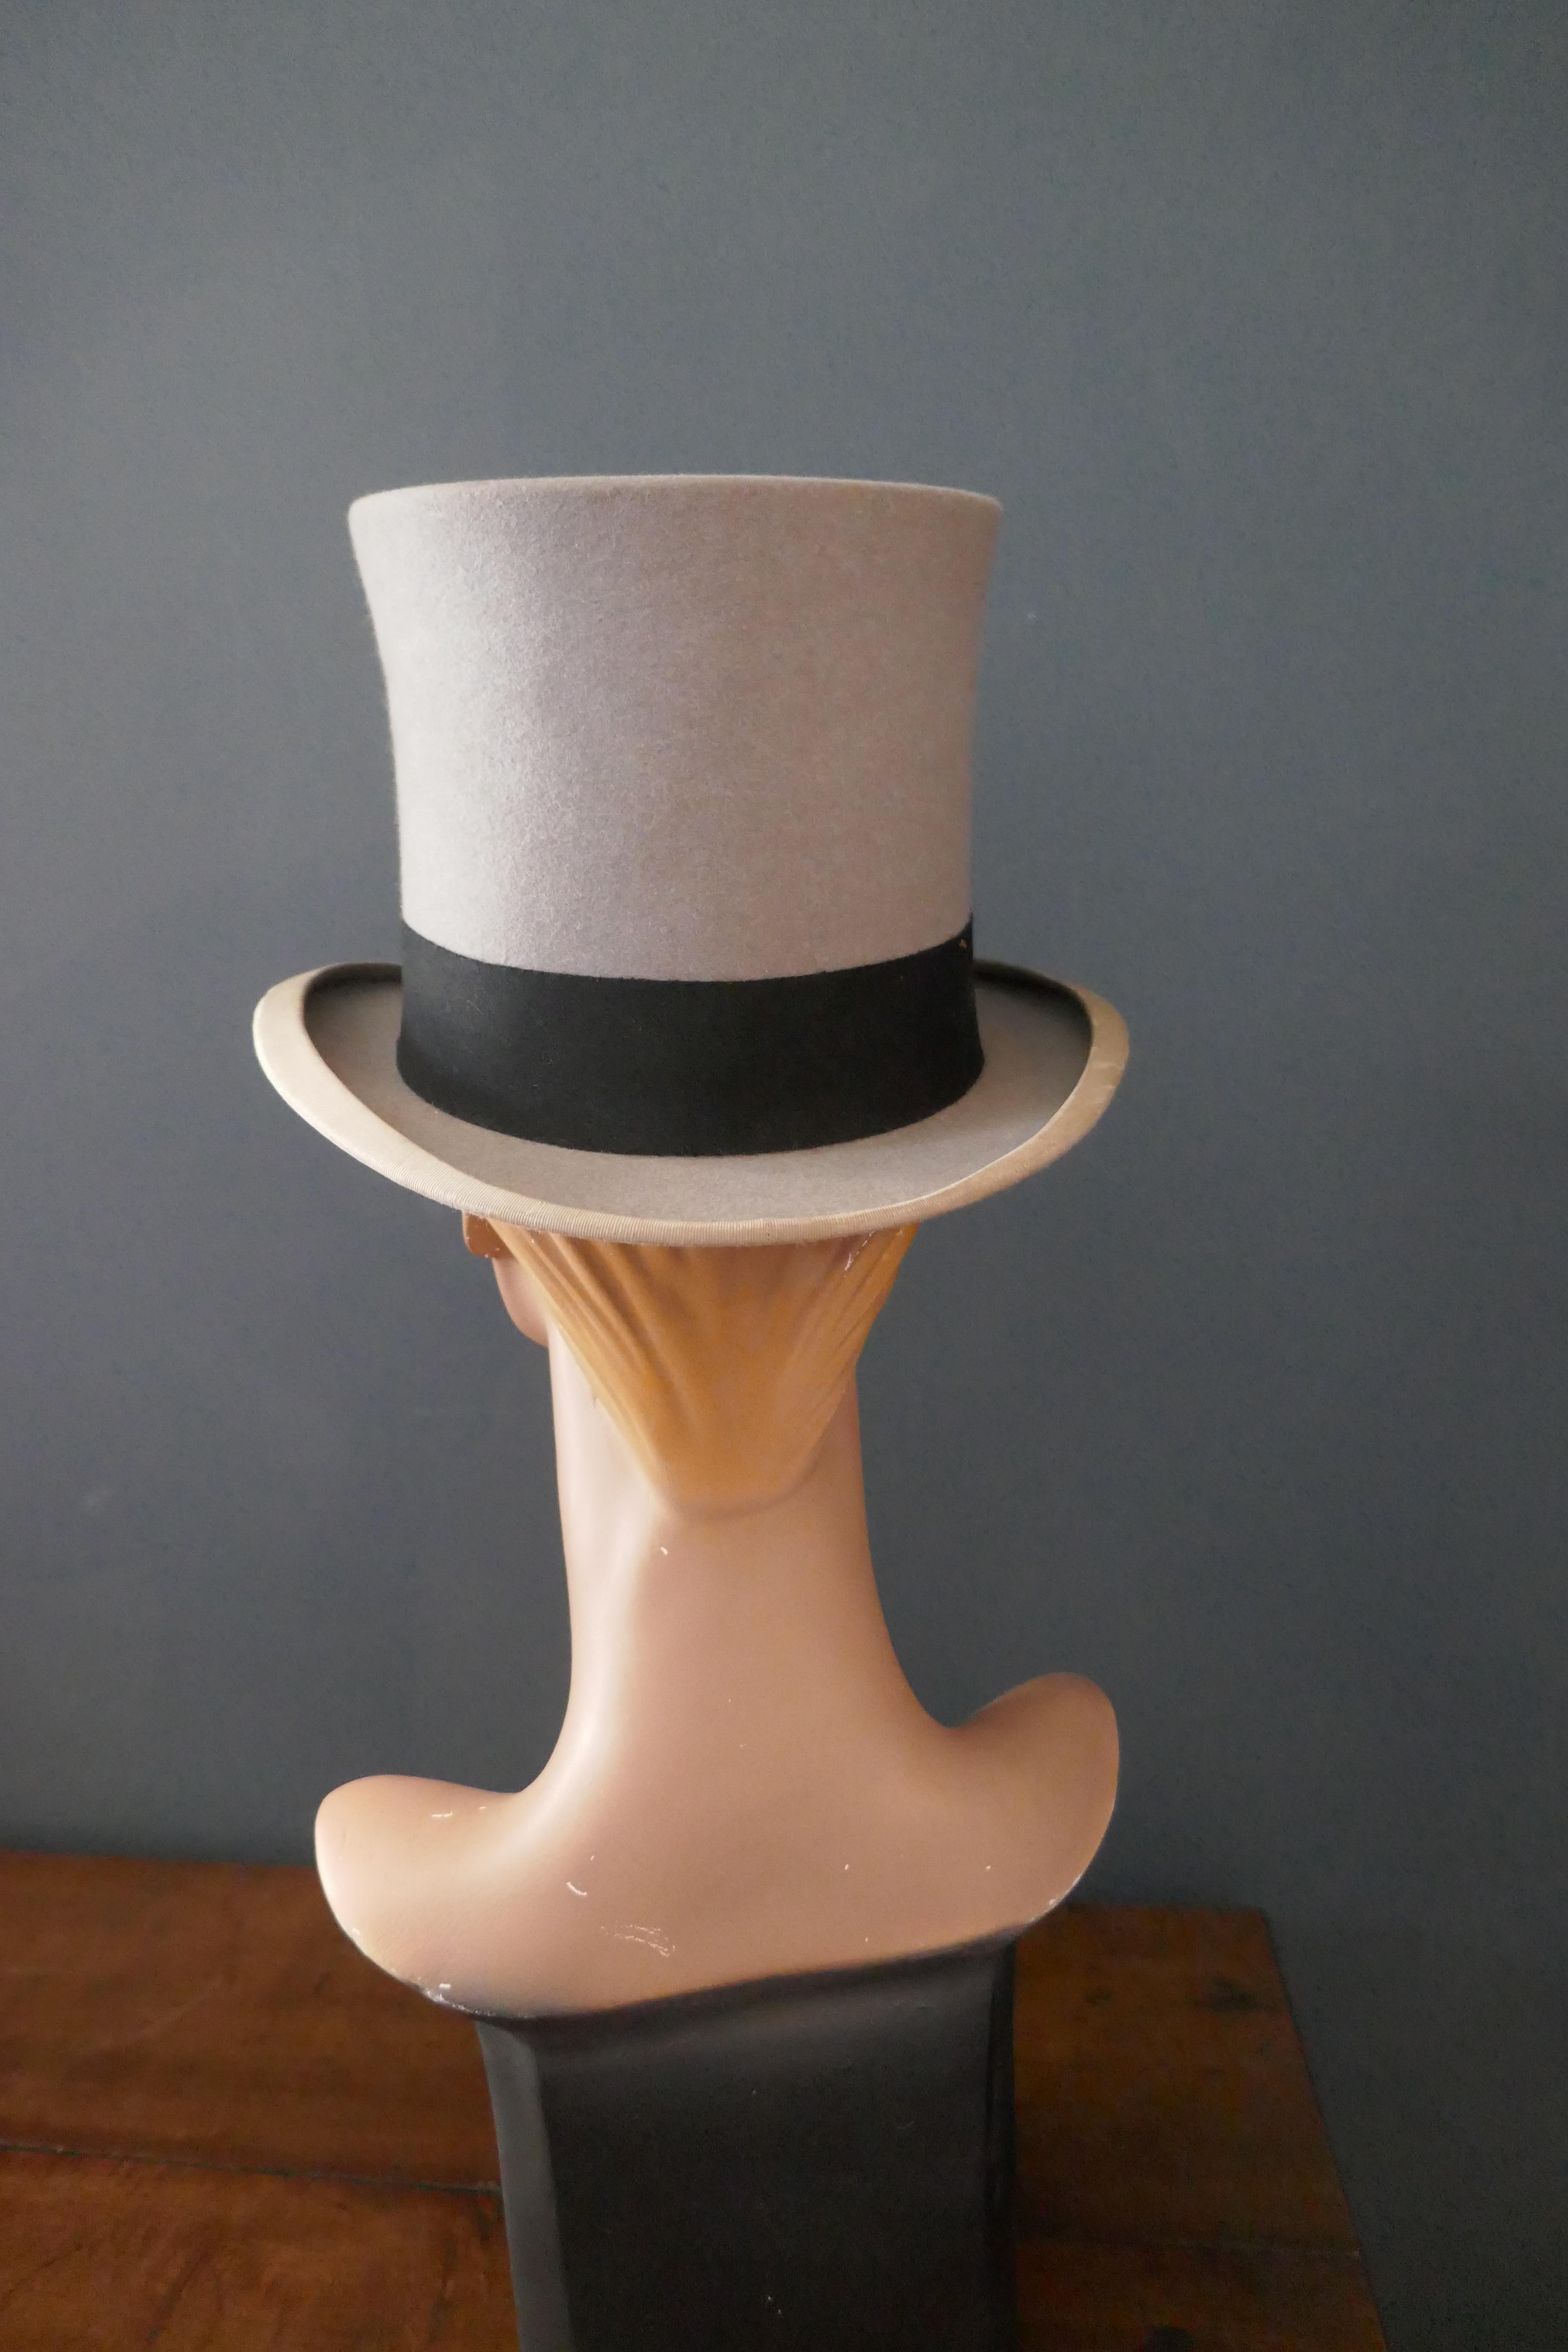 Elegant Vintage Grey Felt Top Hat from Herbert Johnson Bond Street 


Vintage grey felt top hat with black wool band around the brim. 

Kid leather inner band and silk in Lined 

Overall condition is good, some some signs of wear on the brim but no